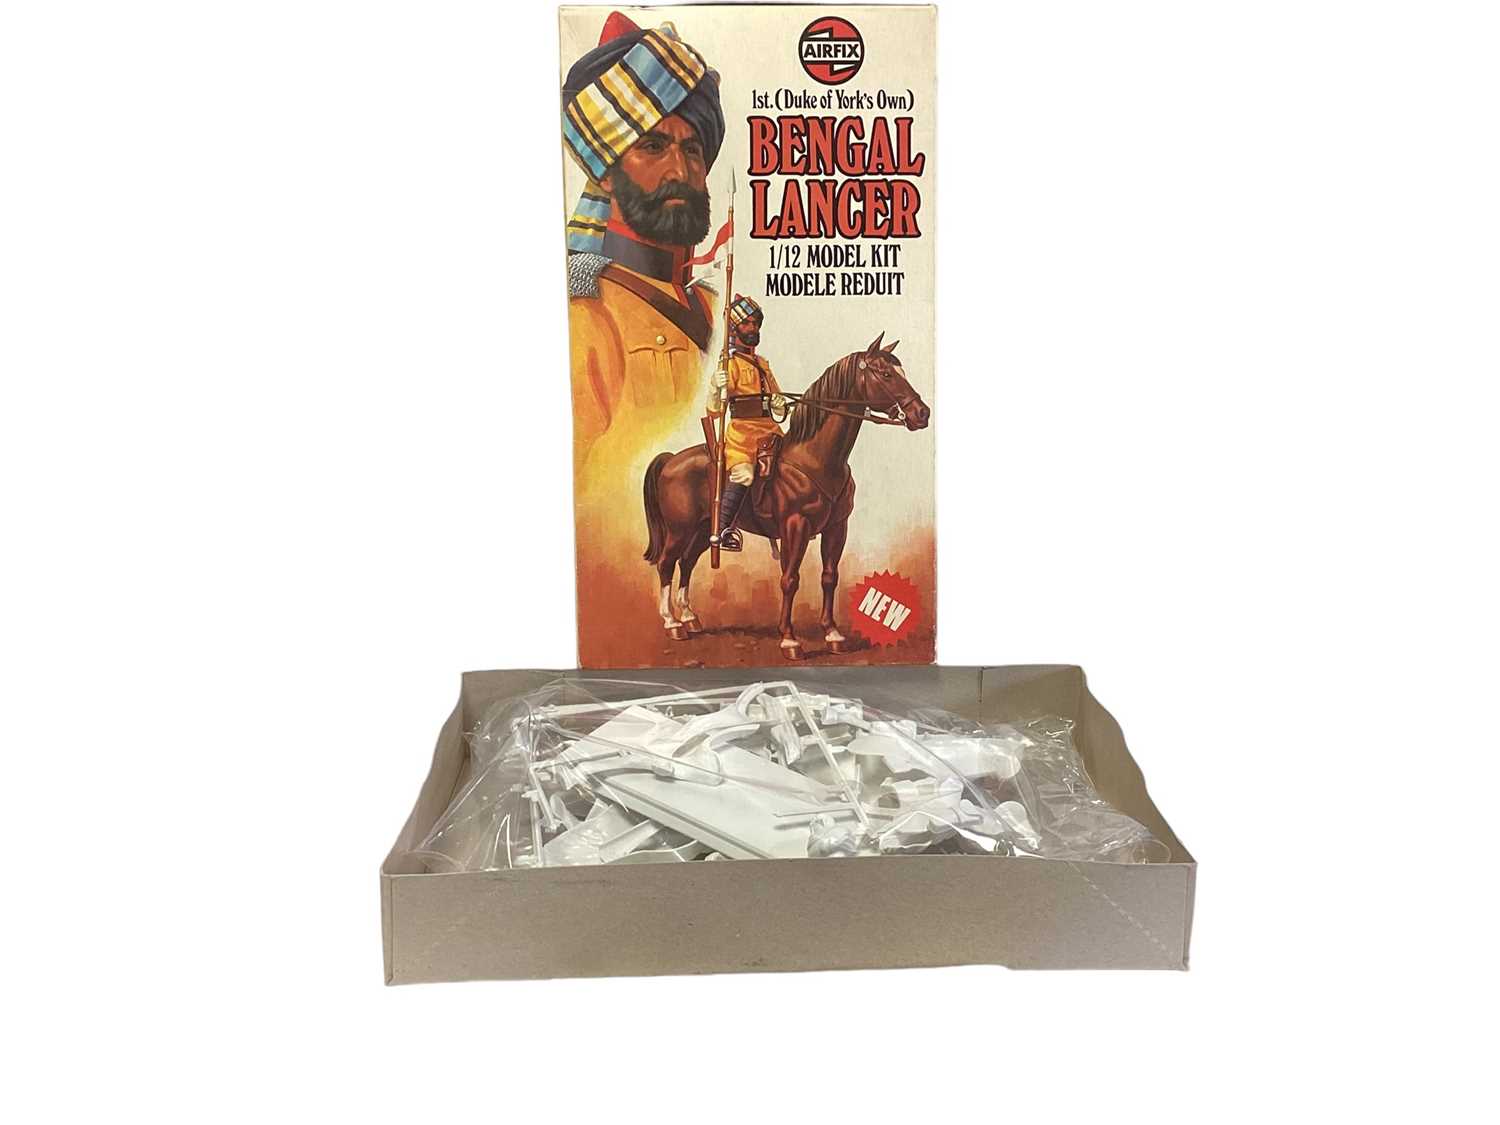 Airfix 1:12 Scale 1st (Duke of York) Bengal Lancer, boxed No. 07501-9 (2) - Image 2 of 2